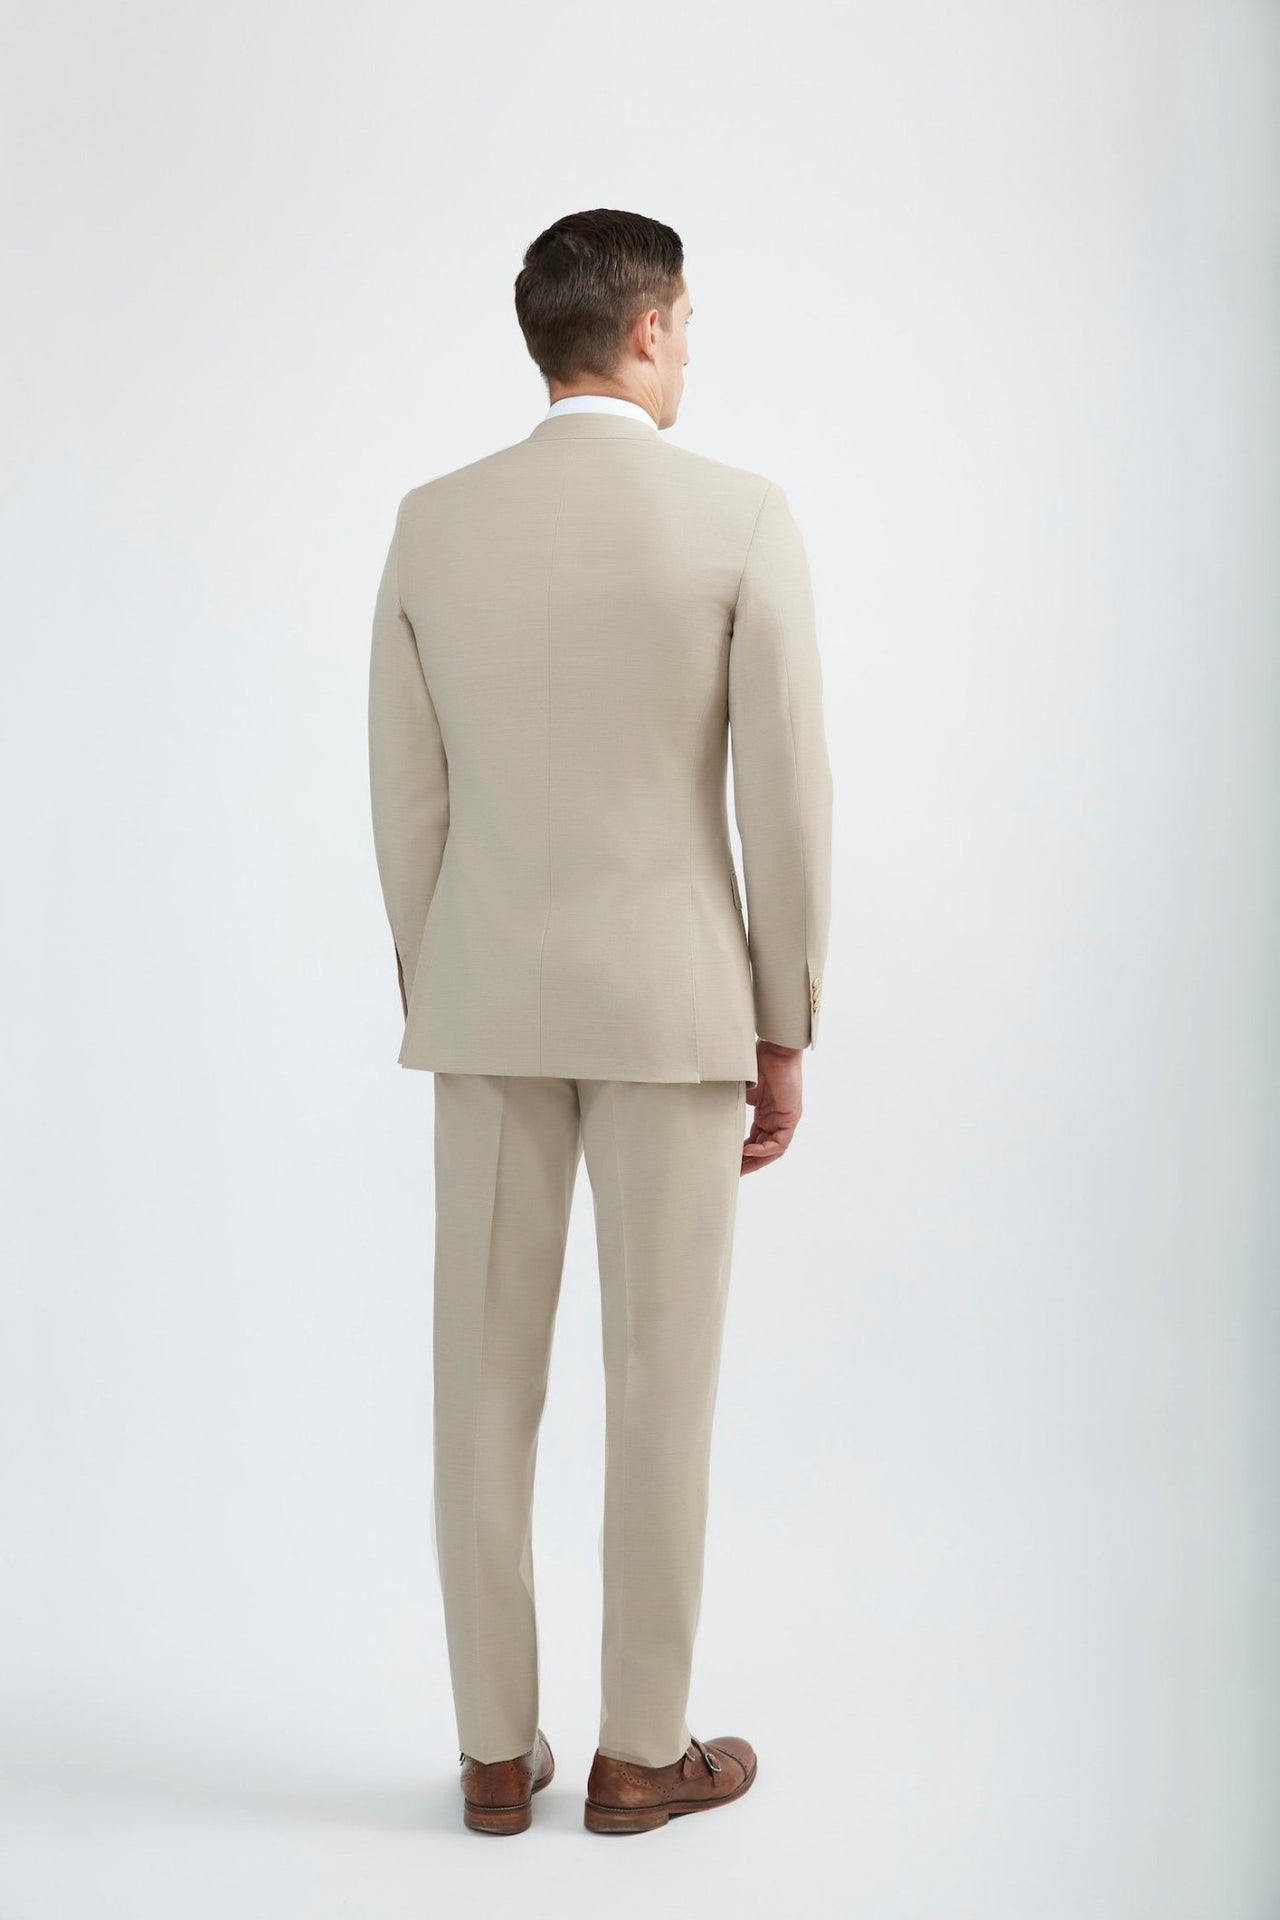 Beige Mens Readymade Suits - Buy Beige Mens Readymade Suits Online at Best  Prices In India | Flipkart.com